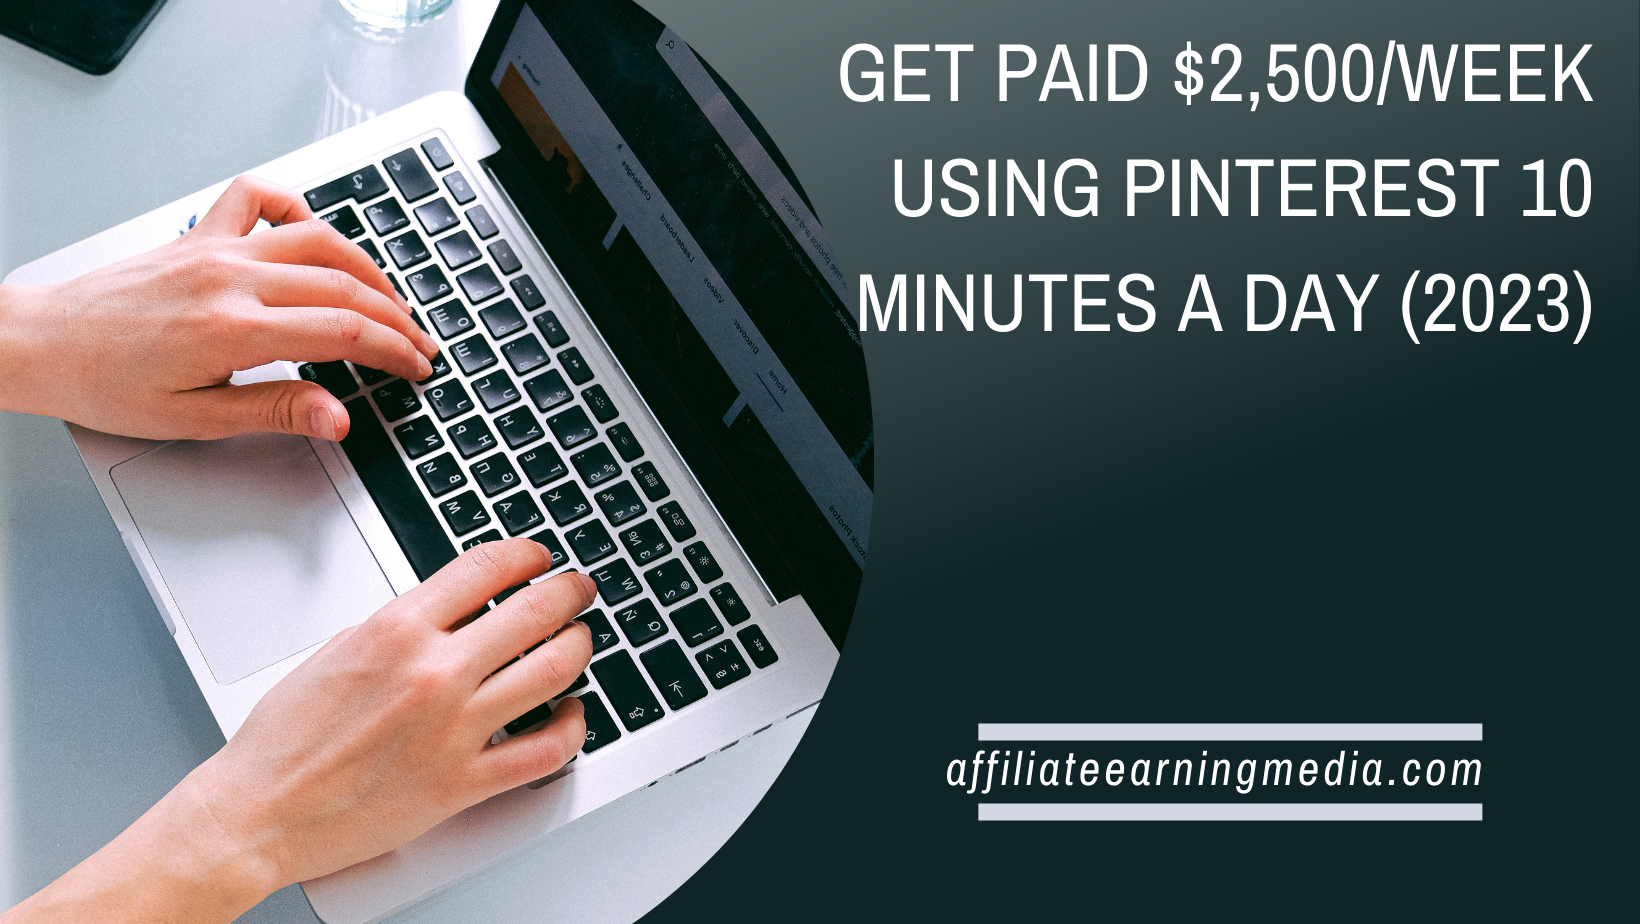 Get Paid $2,500/Week Using Pinterest 10 Minutes A Day (2023)